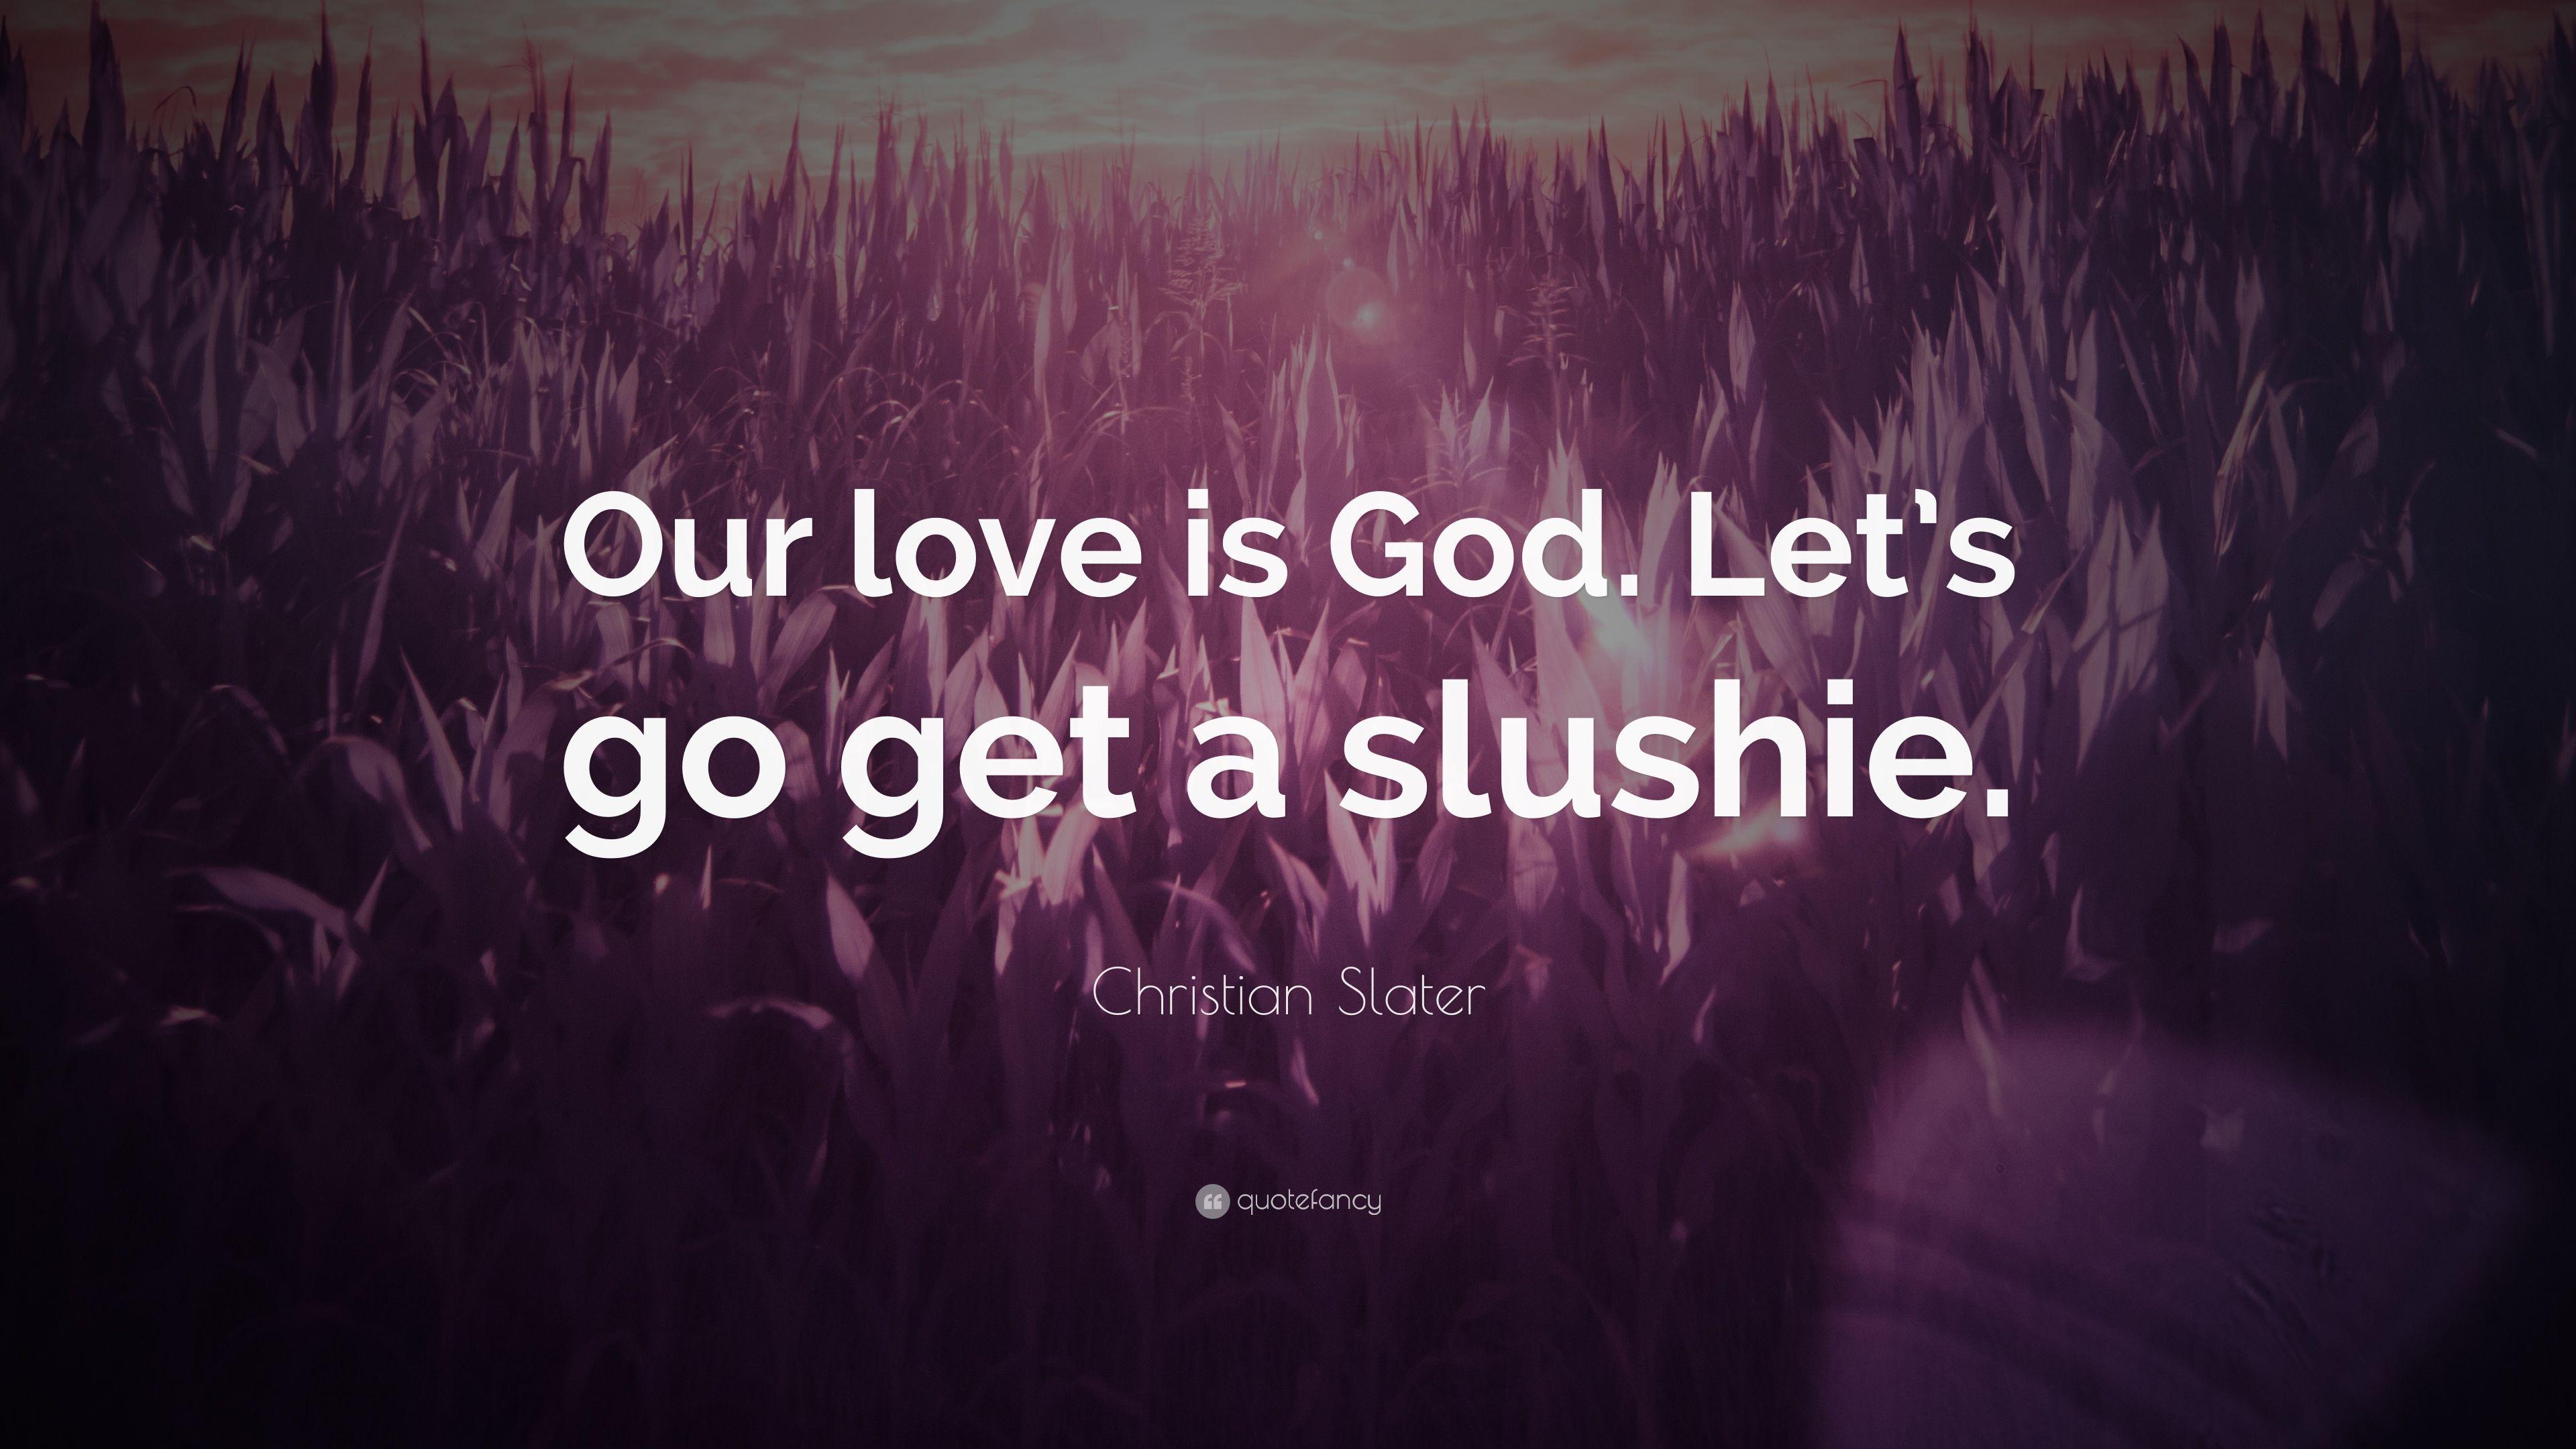 Christian Slater Quote: “Our love is God. Let's go get a slushie